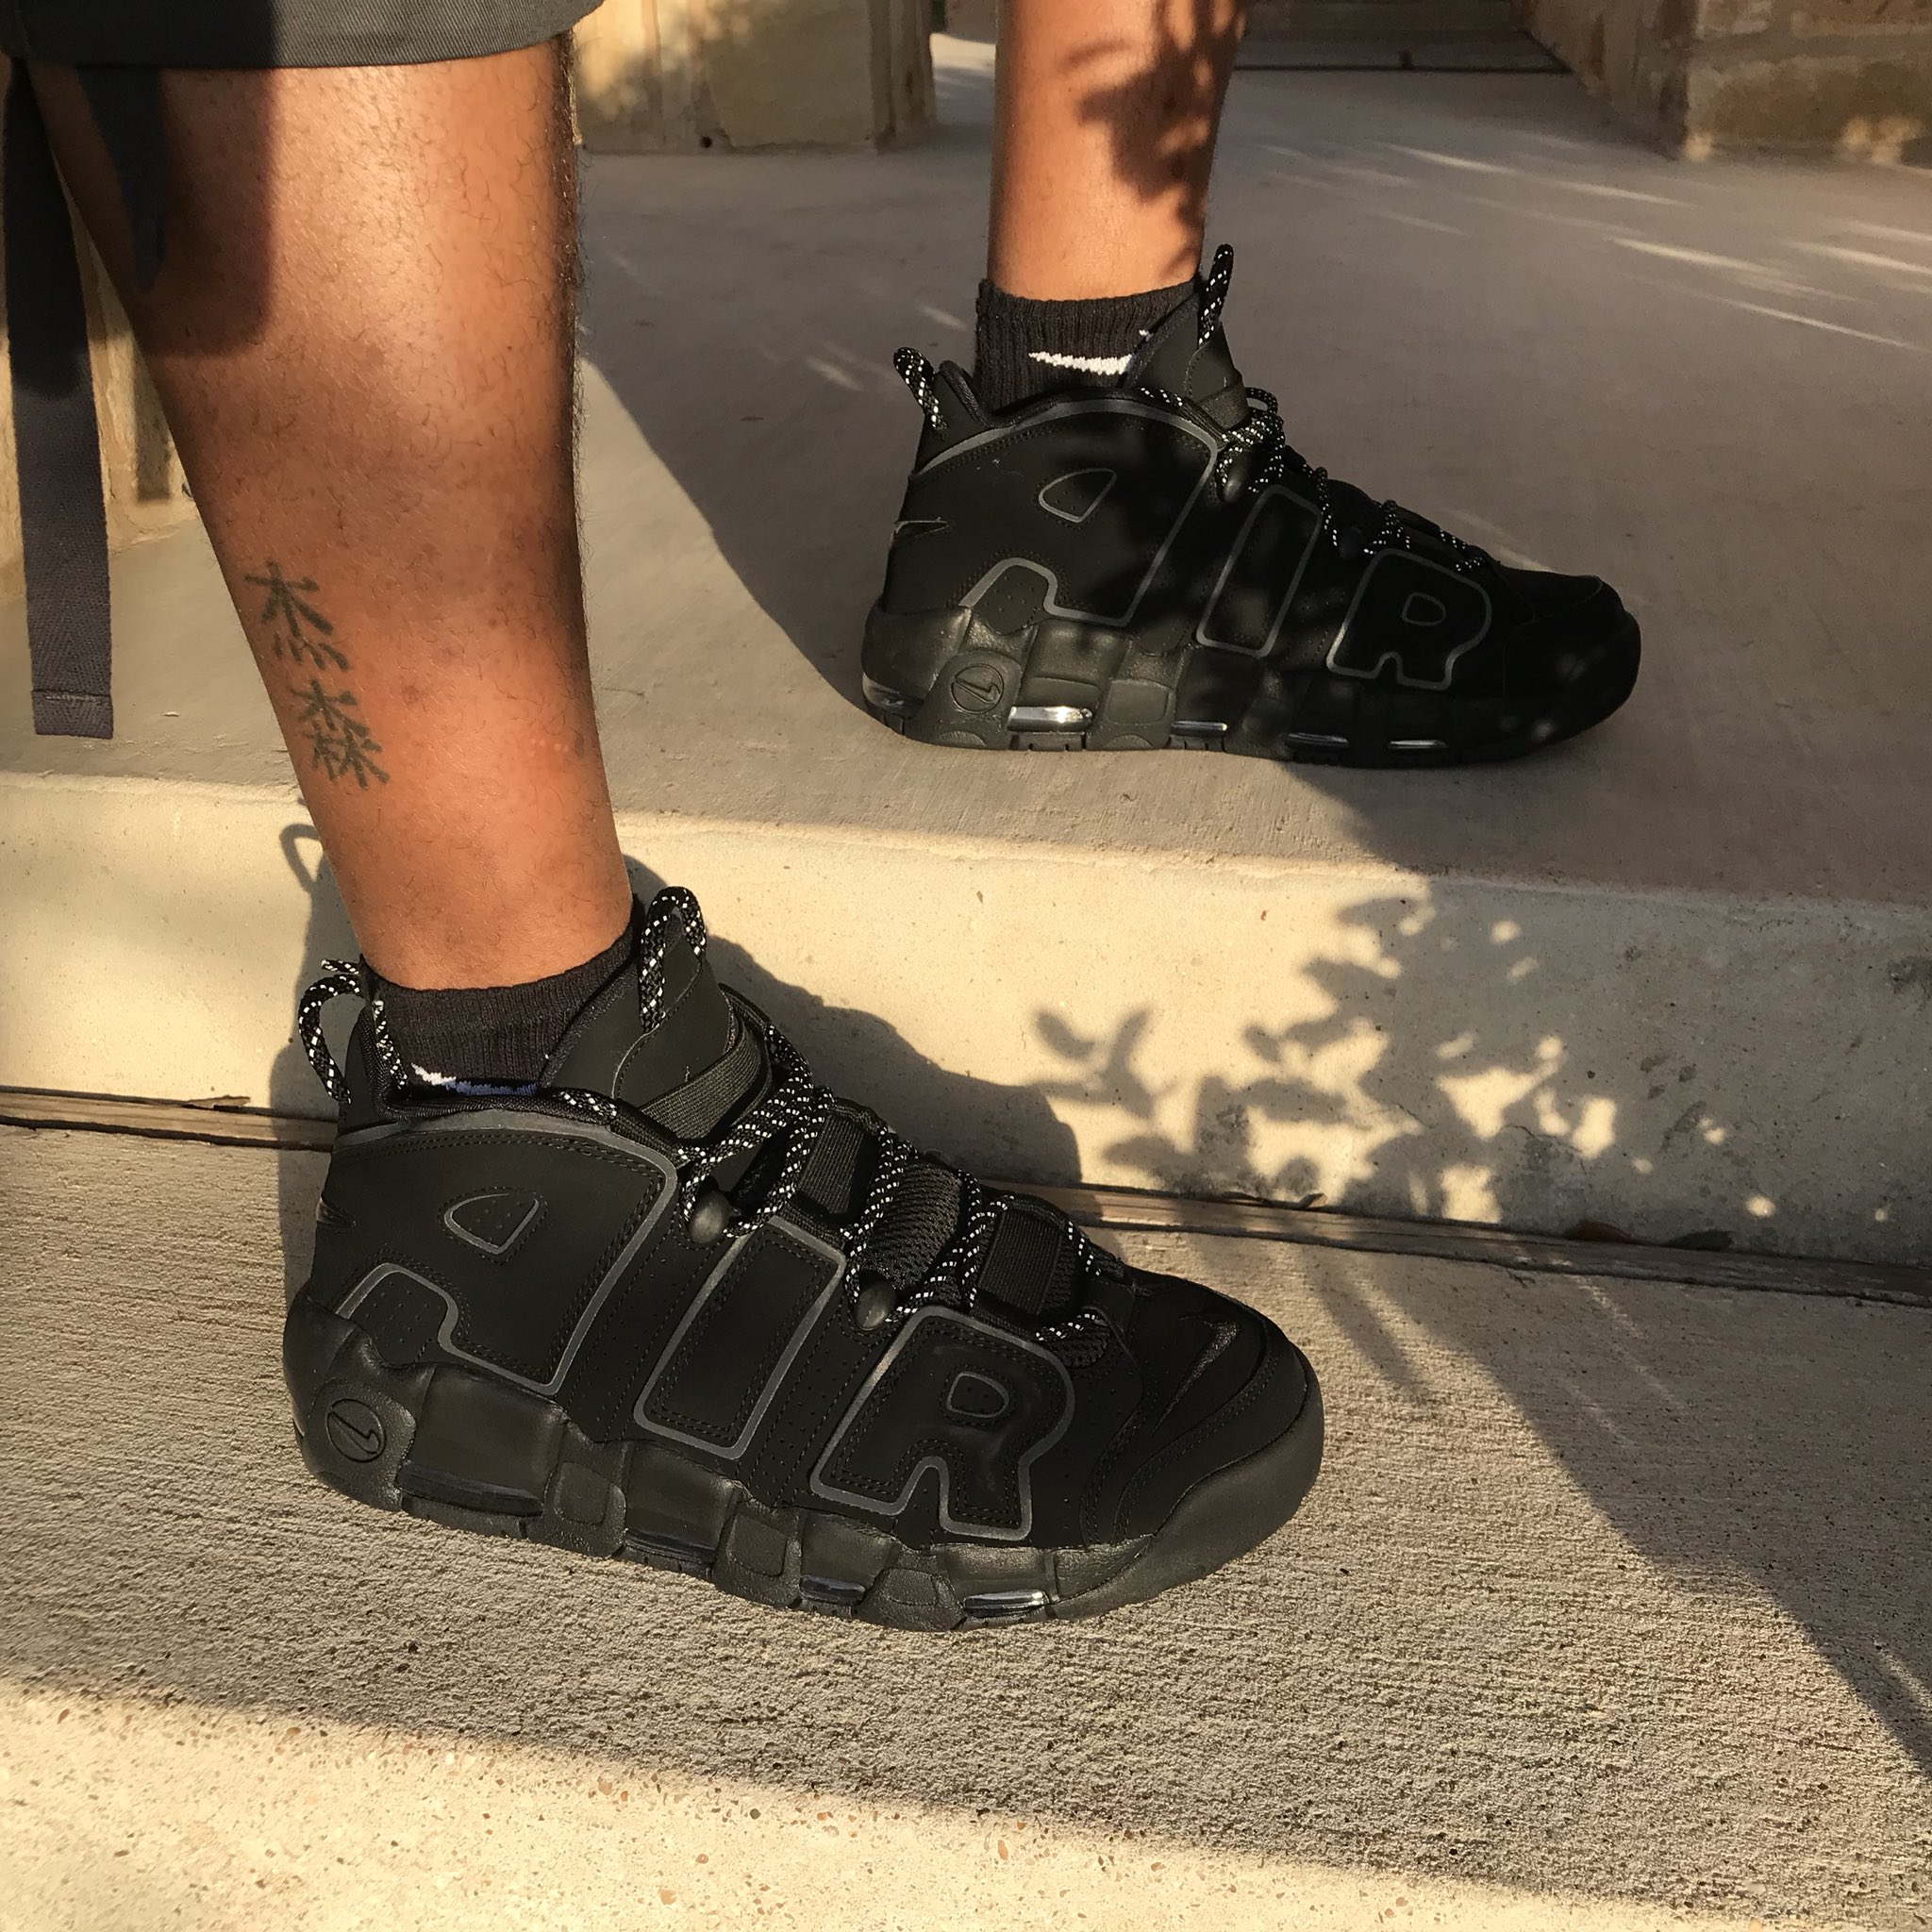 Jason Da MoonMan on X: "I got game.... Nike “Air More Uptempo” in the “ INCOGNITO” colorway. #shoegame #shoeswag #nike #uptempo #incognito #nikeair  #solecollector #dailykicks #kicksoftheday #kicksonfire #soles #dailysole  #shoefie #shoepalace #nikeplus ...